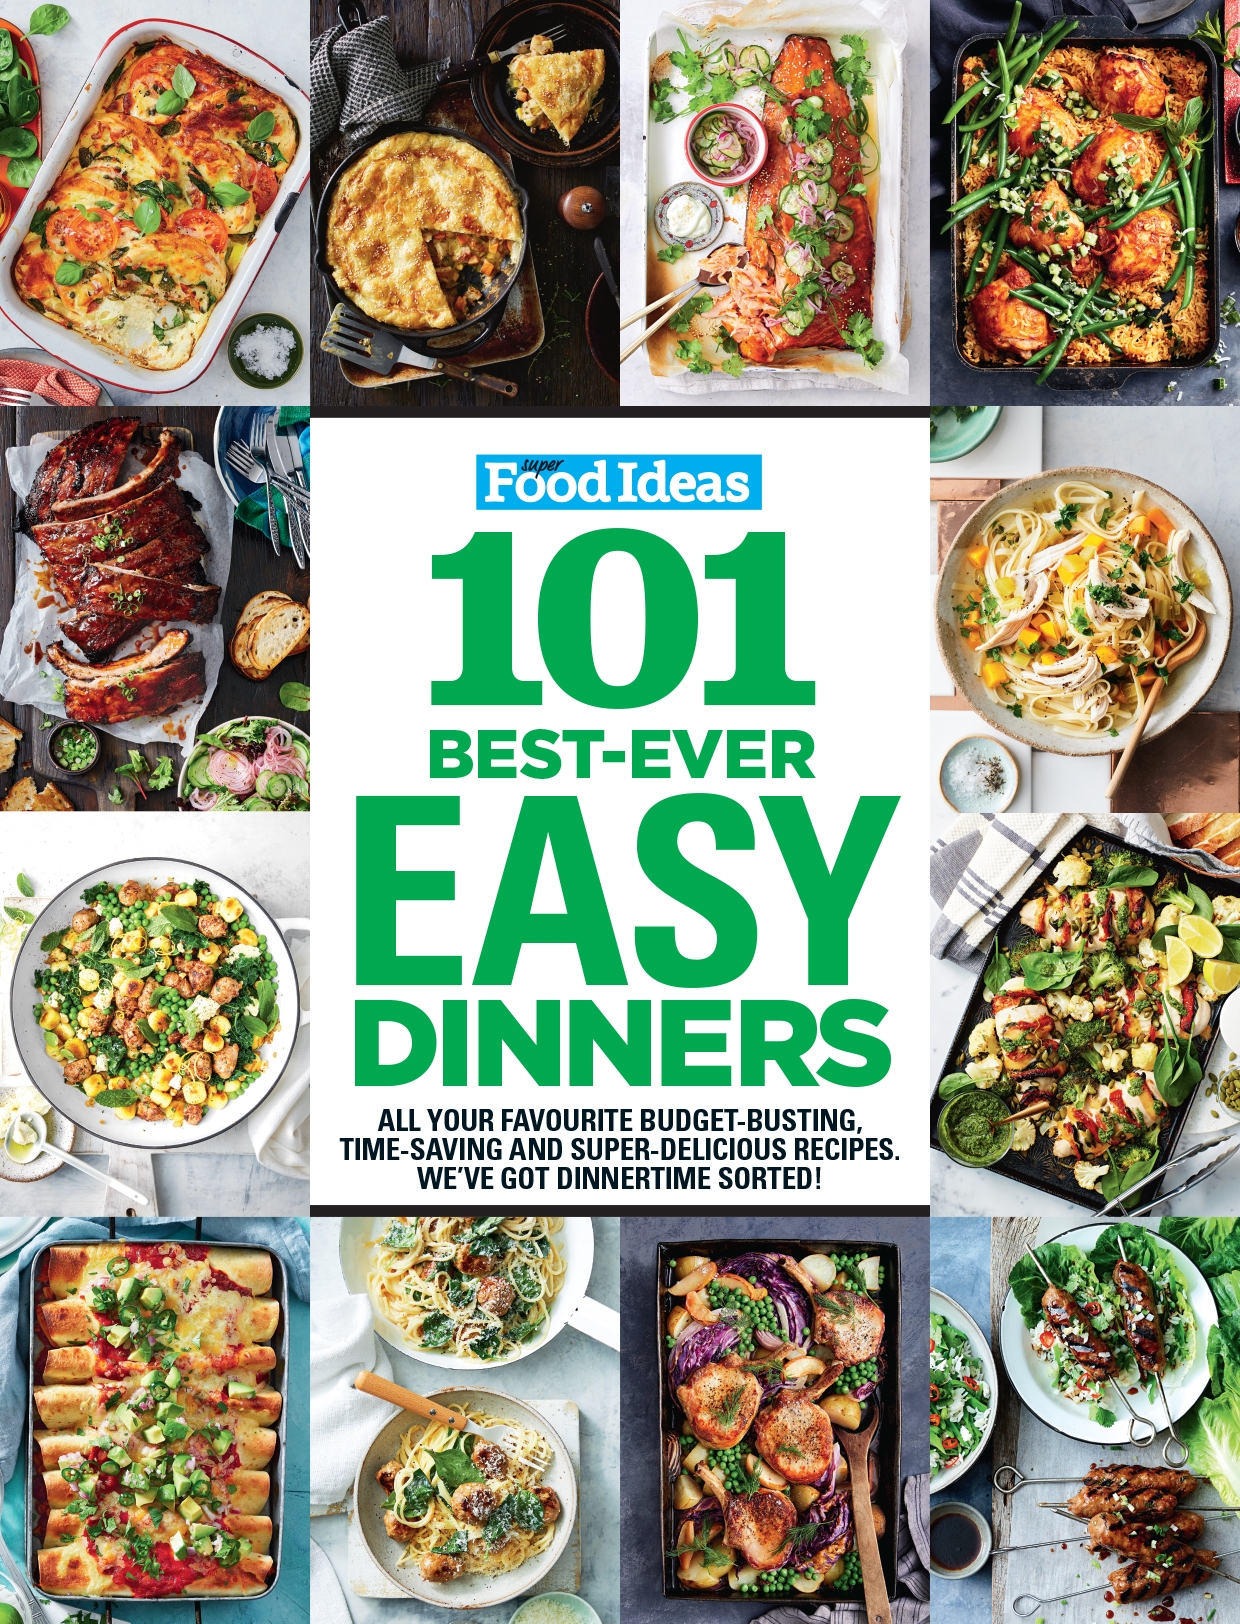 Super Food Ideas -101 Best Ever Easy Dinners